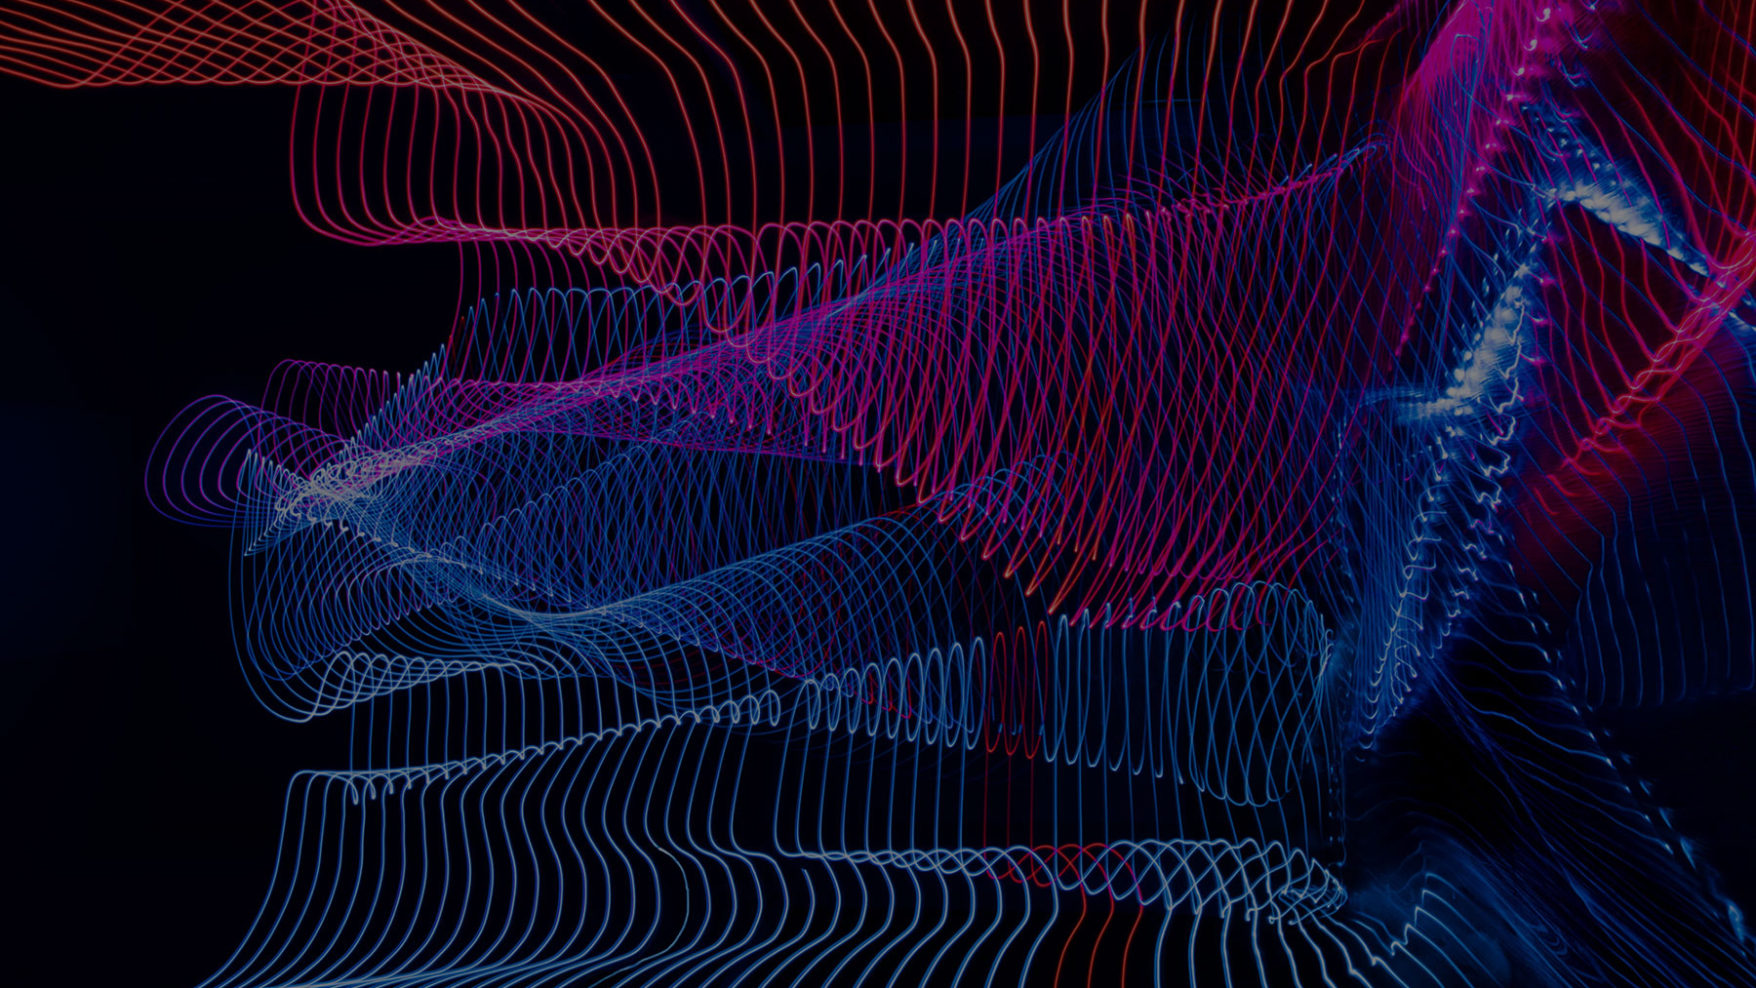 Abstract lines in wave formation that depicts motion from the top to bottom in red and blue